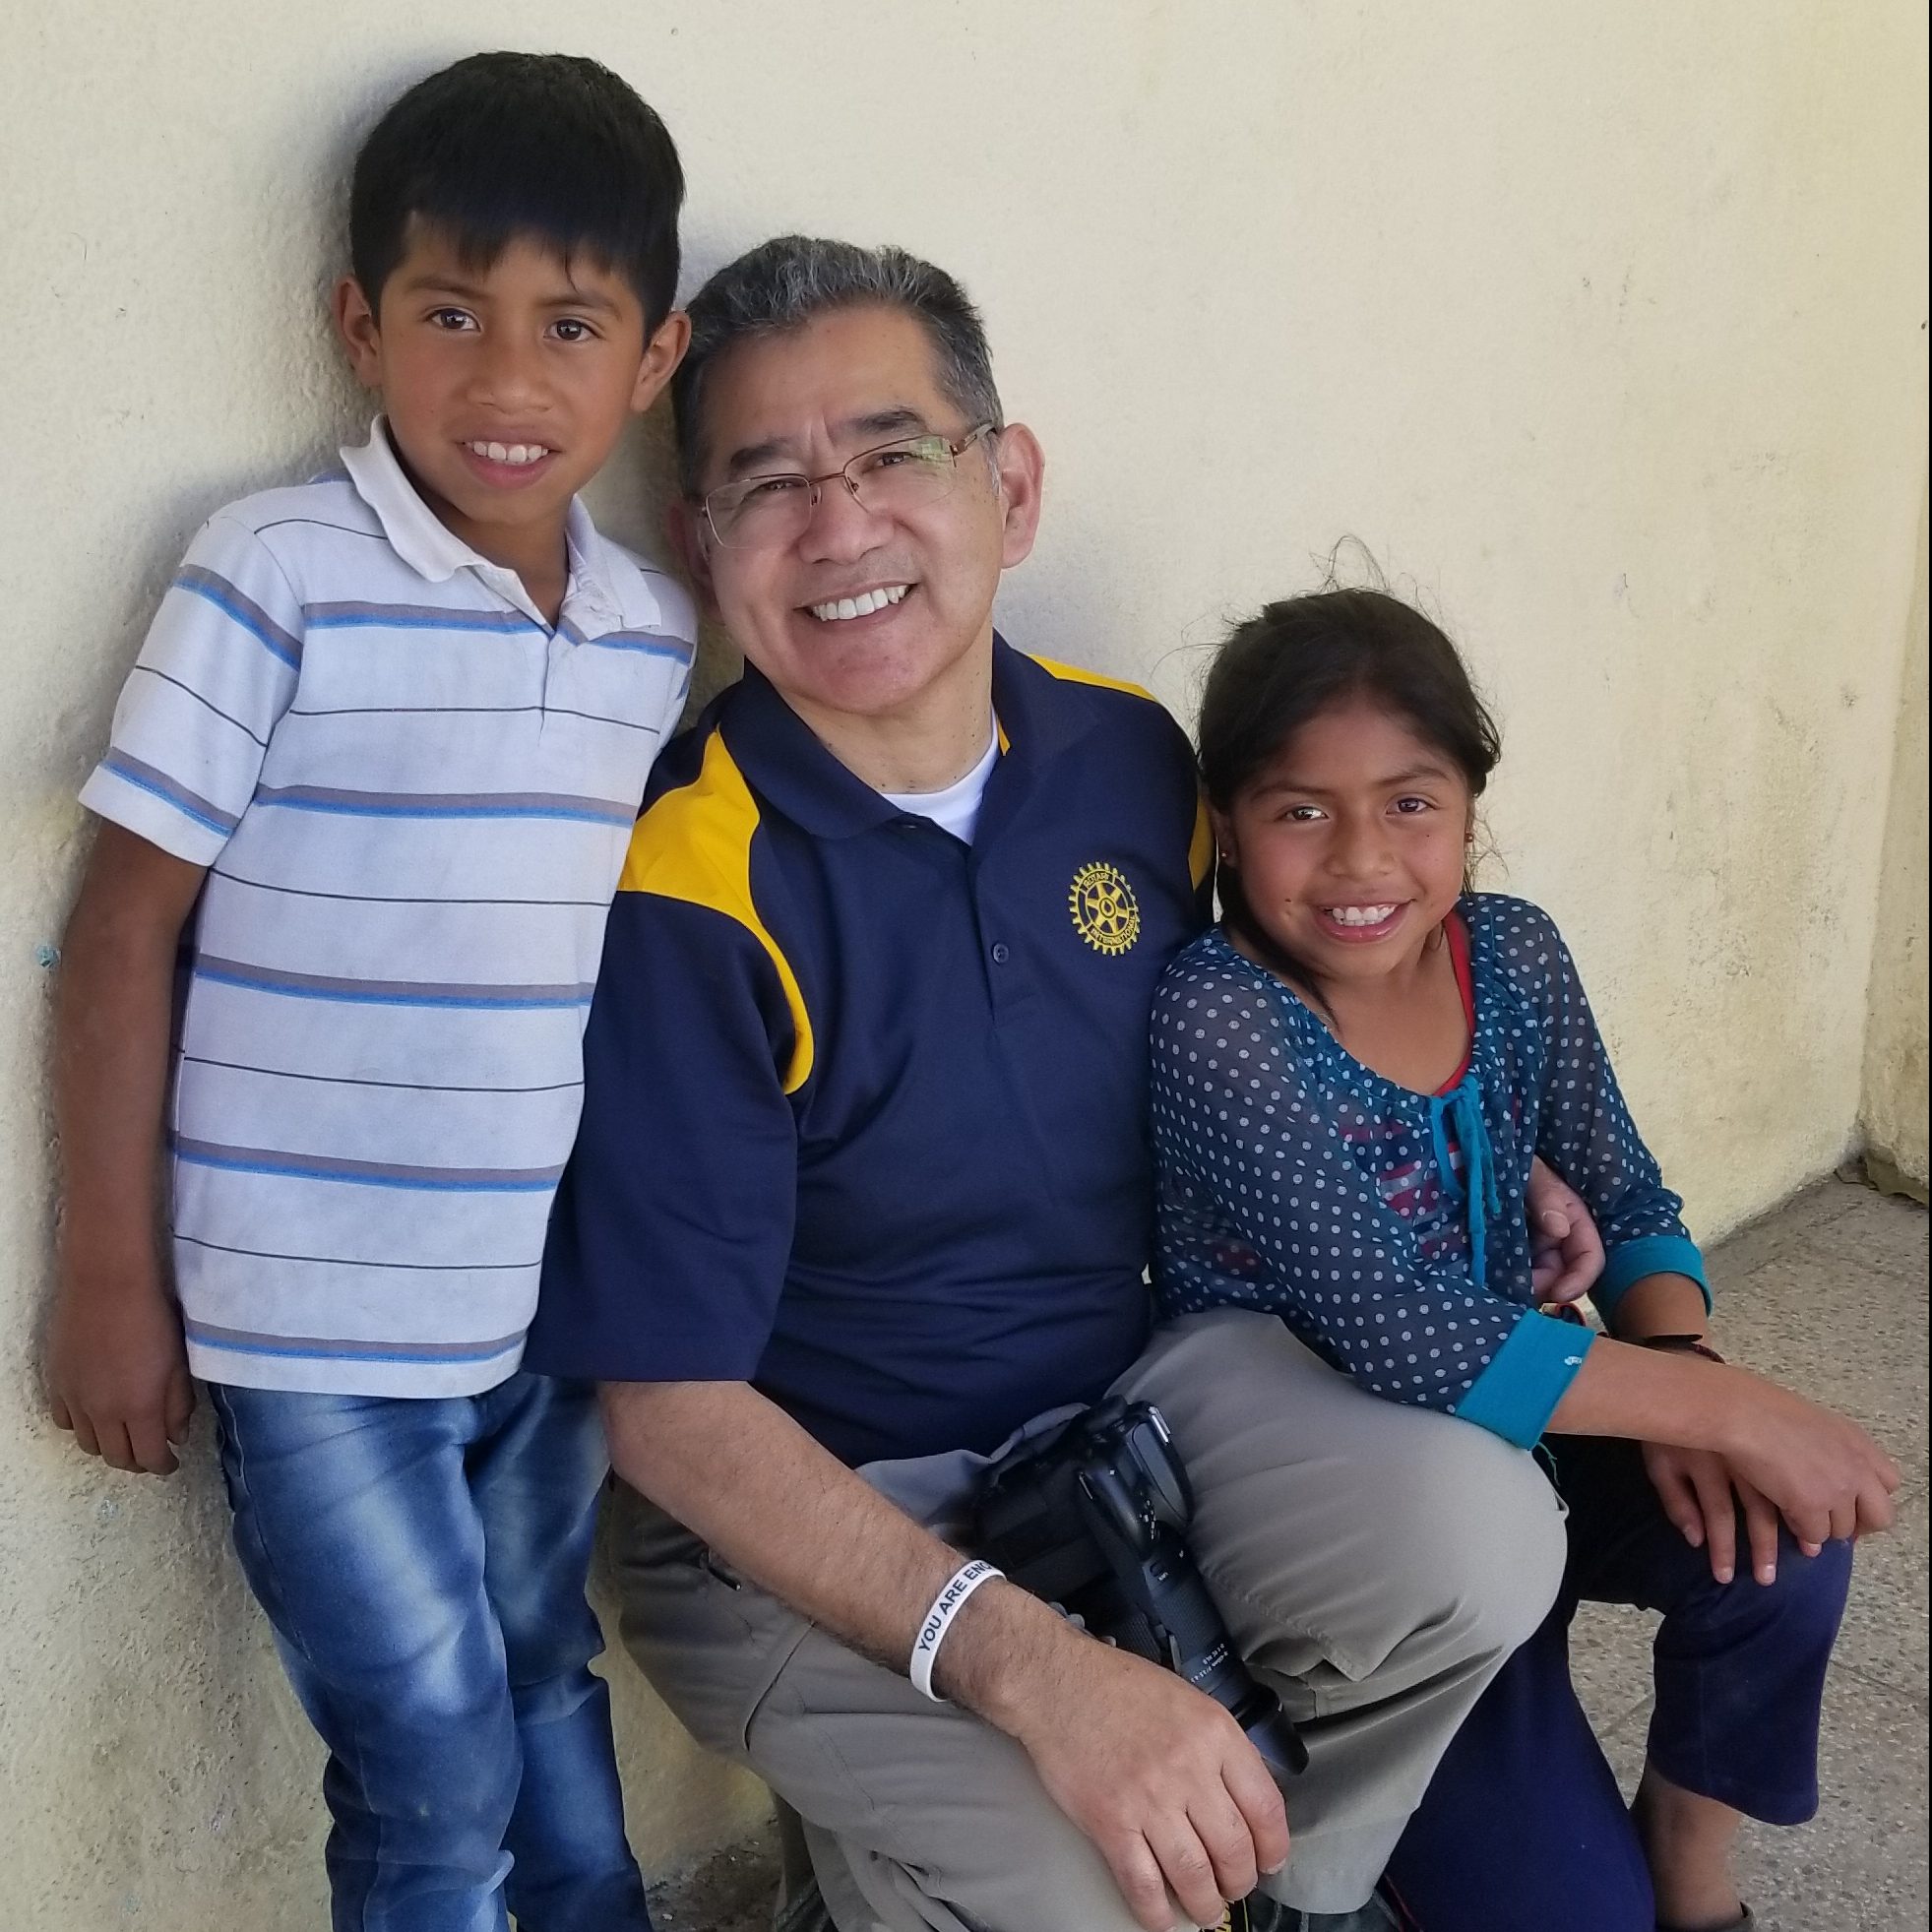 Man standing with two children smiling